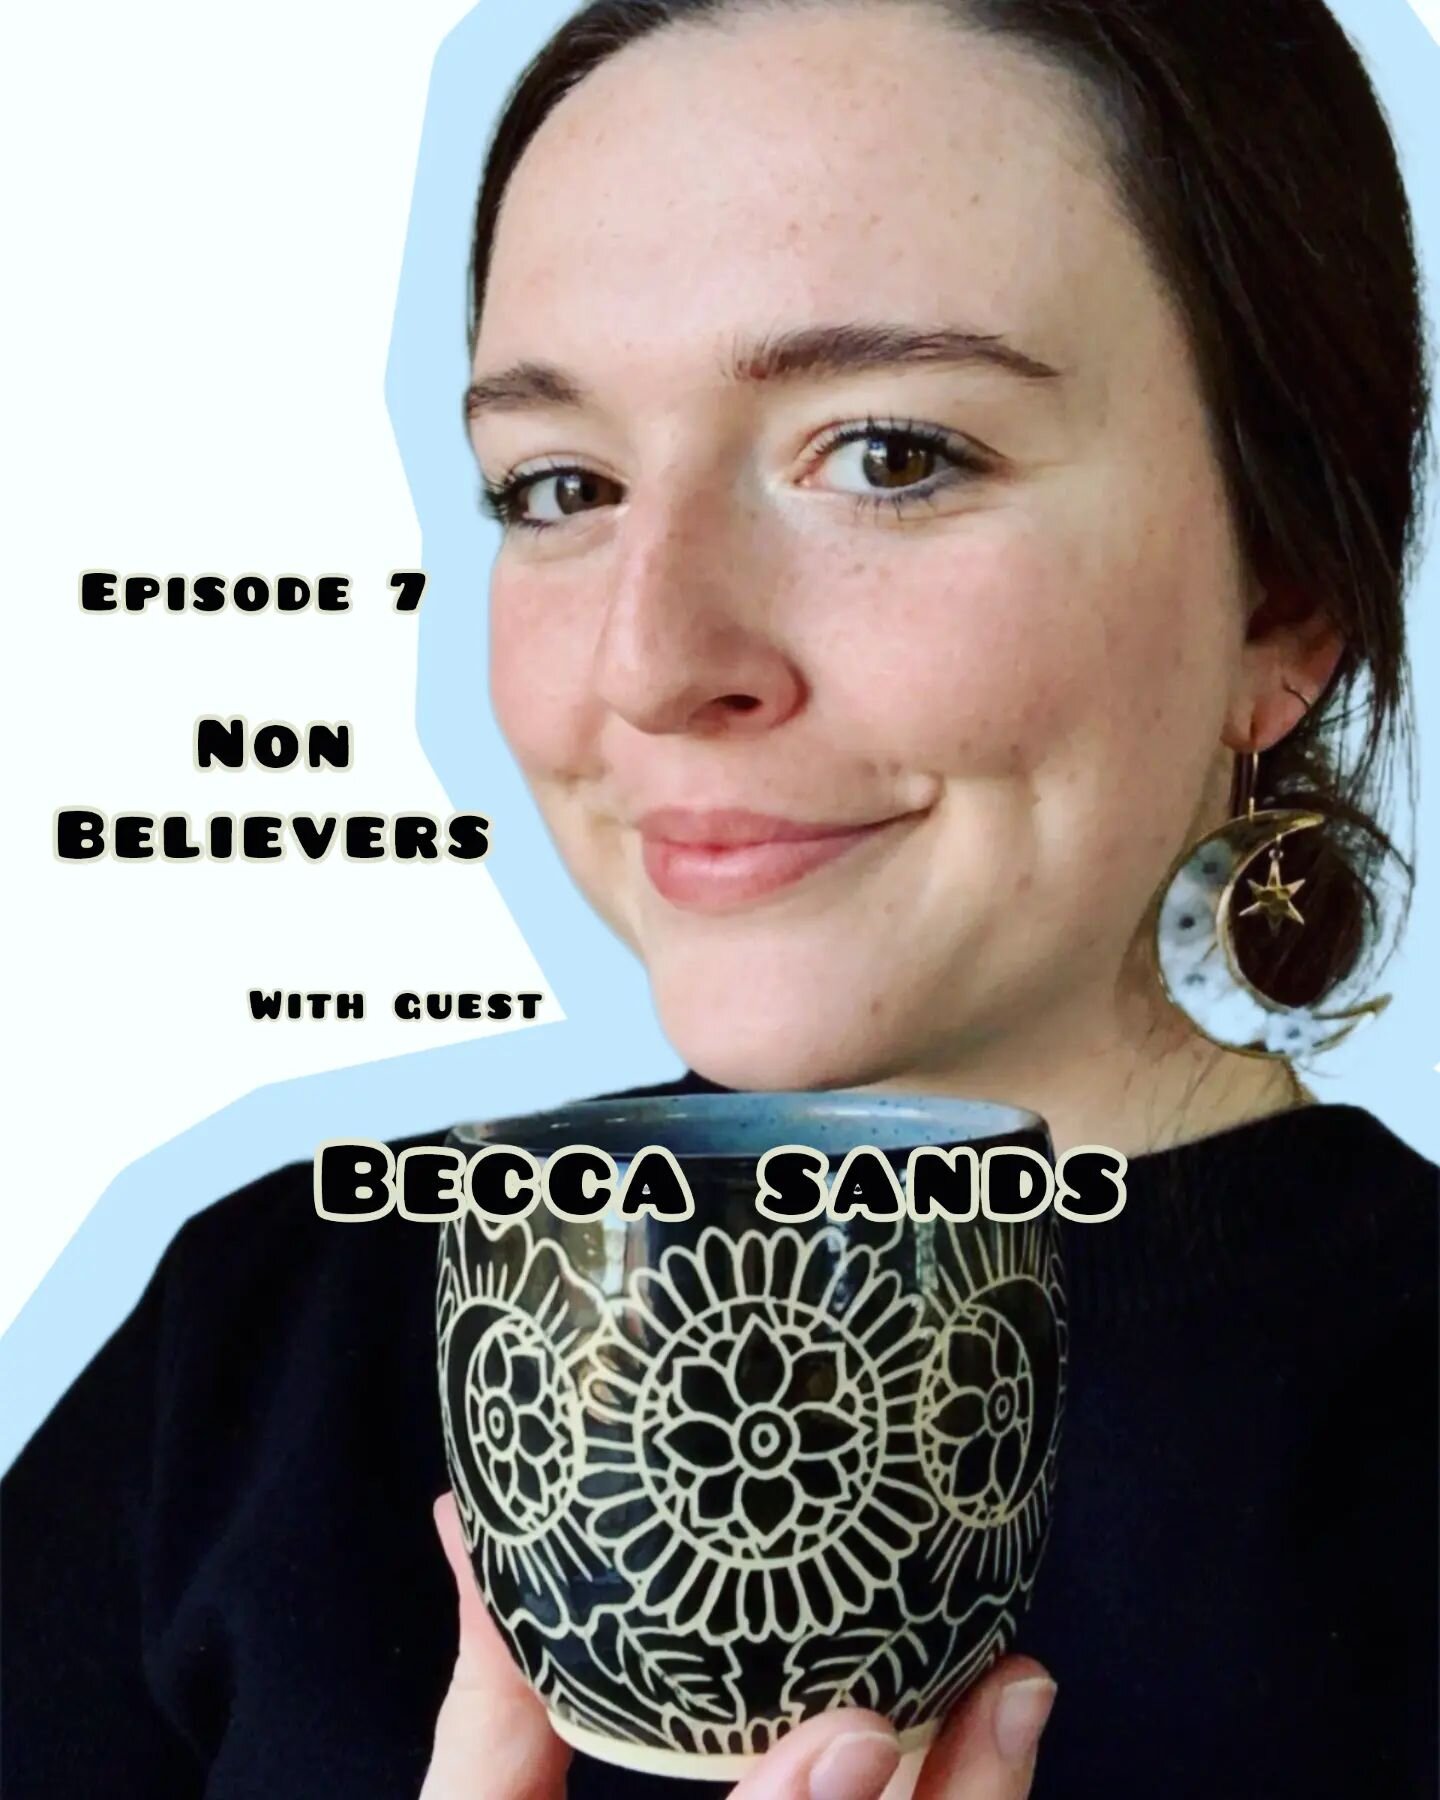 New episode alert!! Woo! 

On this episode @simplysands_ceramics Becca and I talked about our experiences with non-believers. What's a Non-believer? Well, listen in to find out! Podcast link in bio! 

Here's me being the weirdo host I am, I can't hid